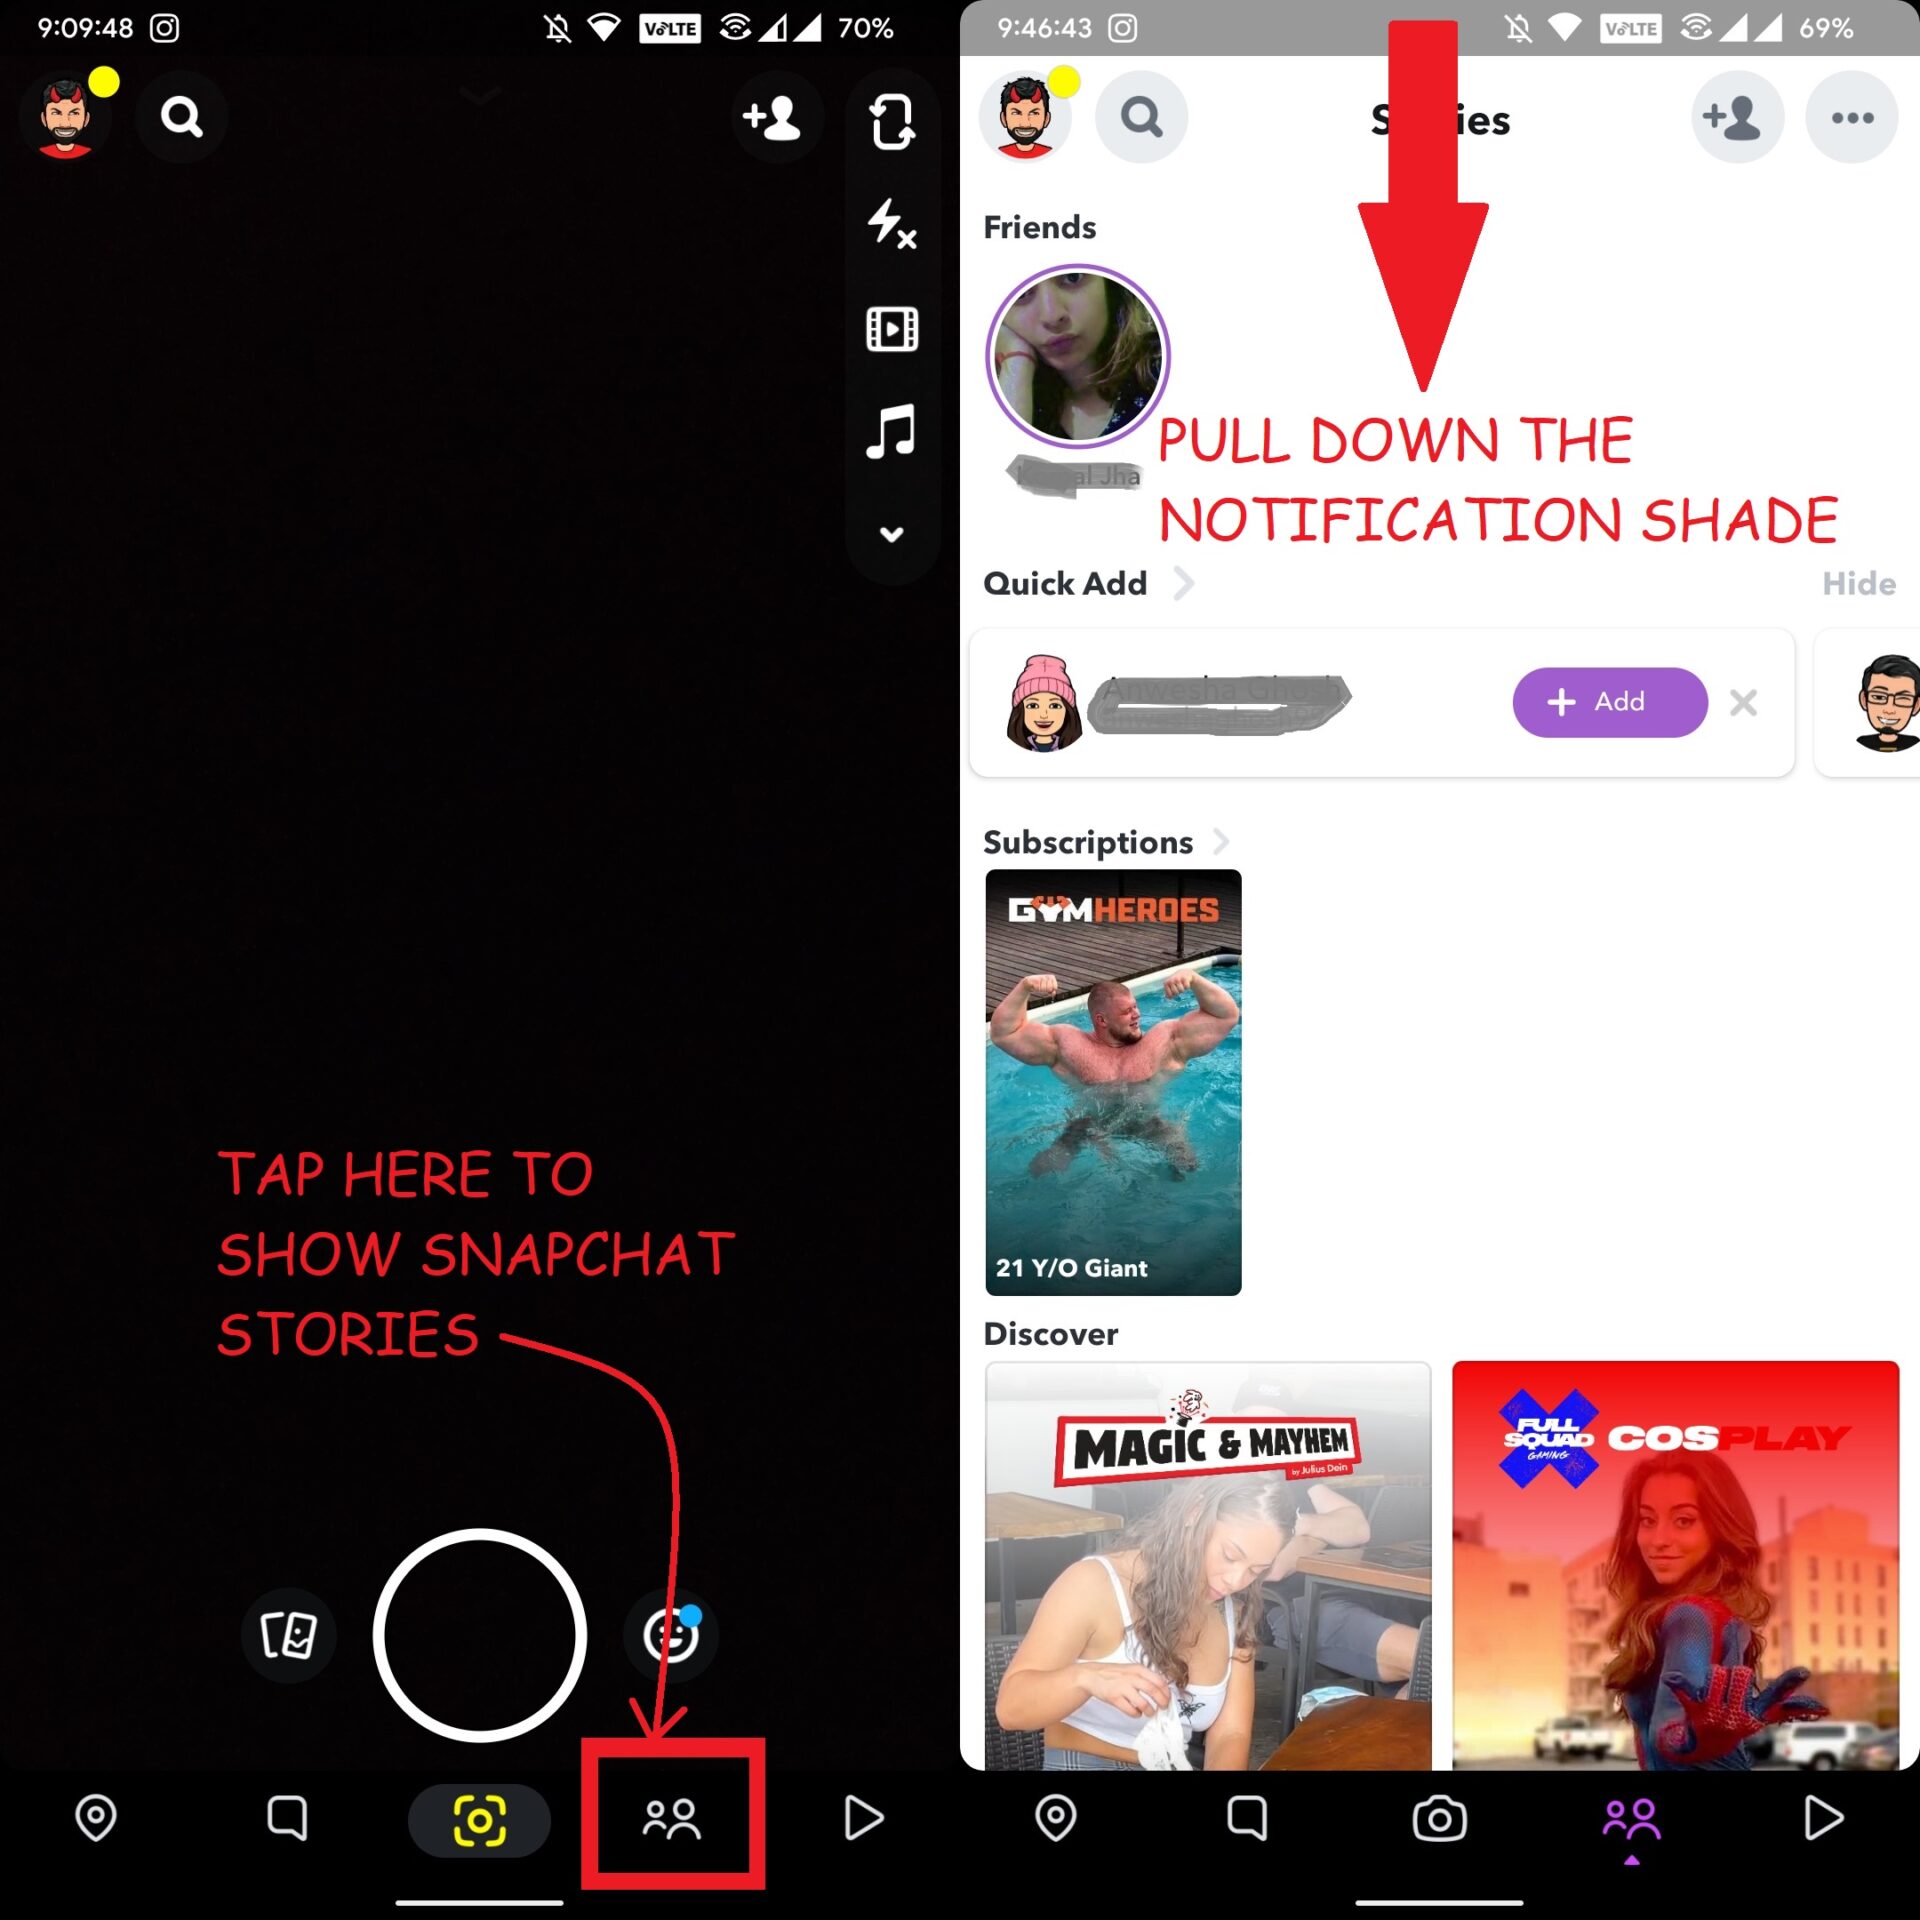 Open the official Snapchat app and View Snapchat Stories